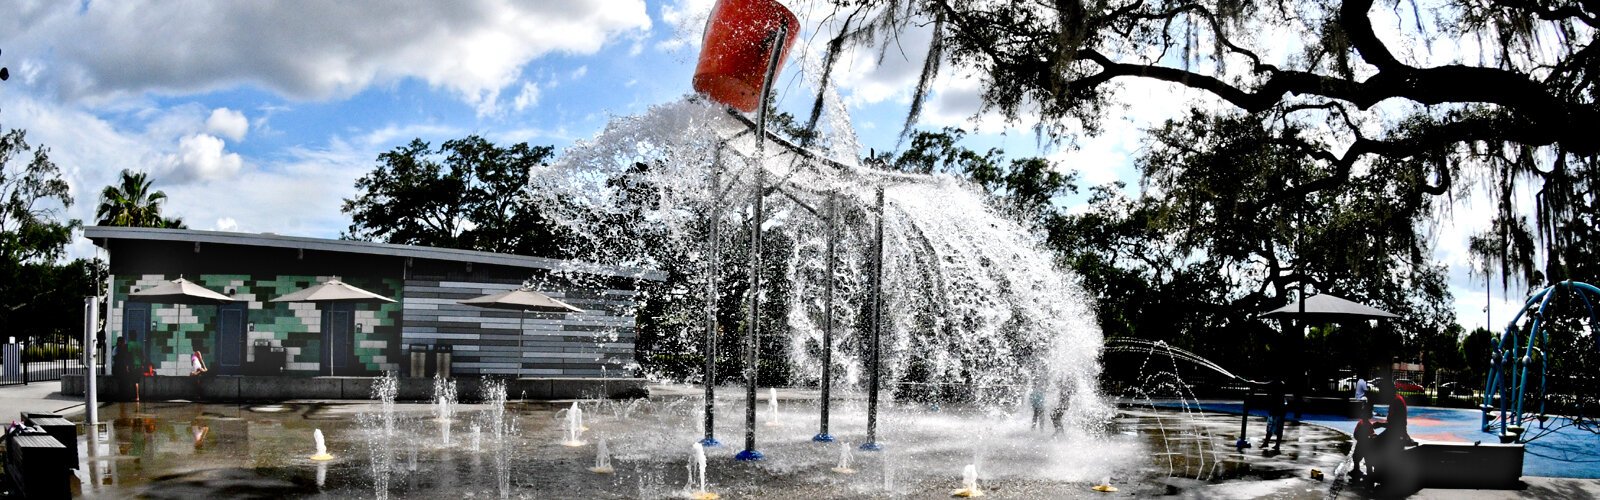 A large bucket splashing gallons of water on the splash pad every few minutes is a cool way to cool off from the sweltering heat at Julian B. Lane Riverfront Park in Tampa's West River area.